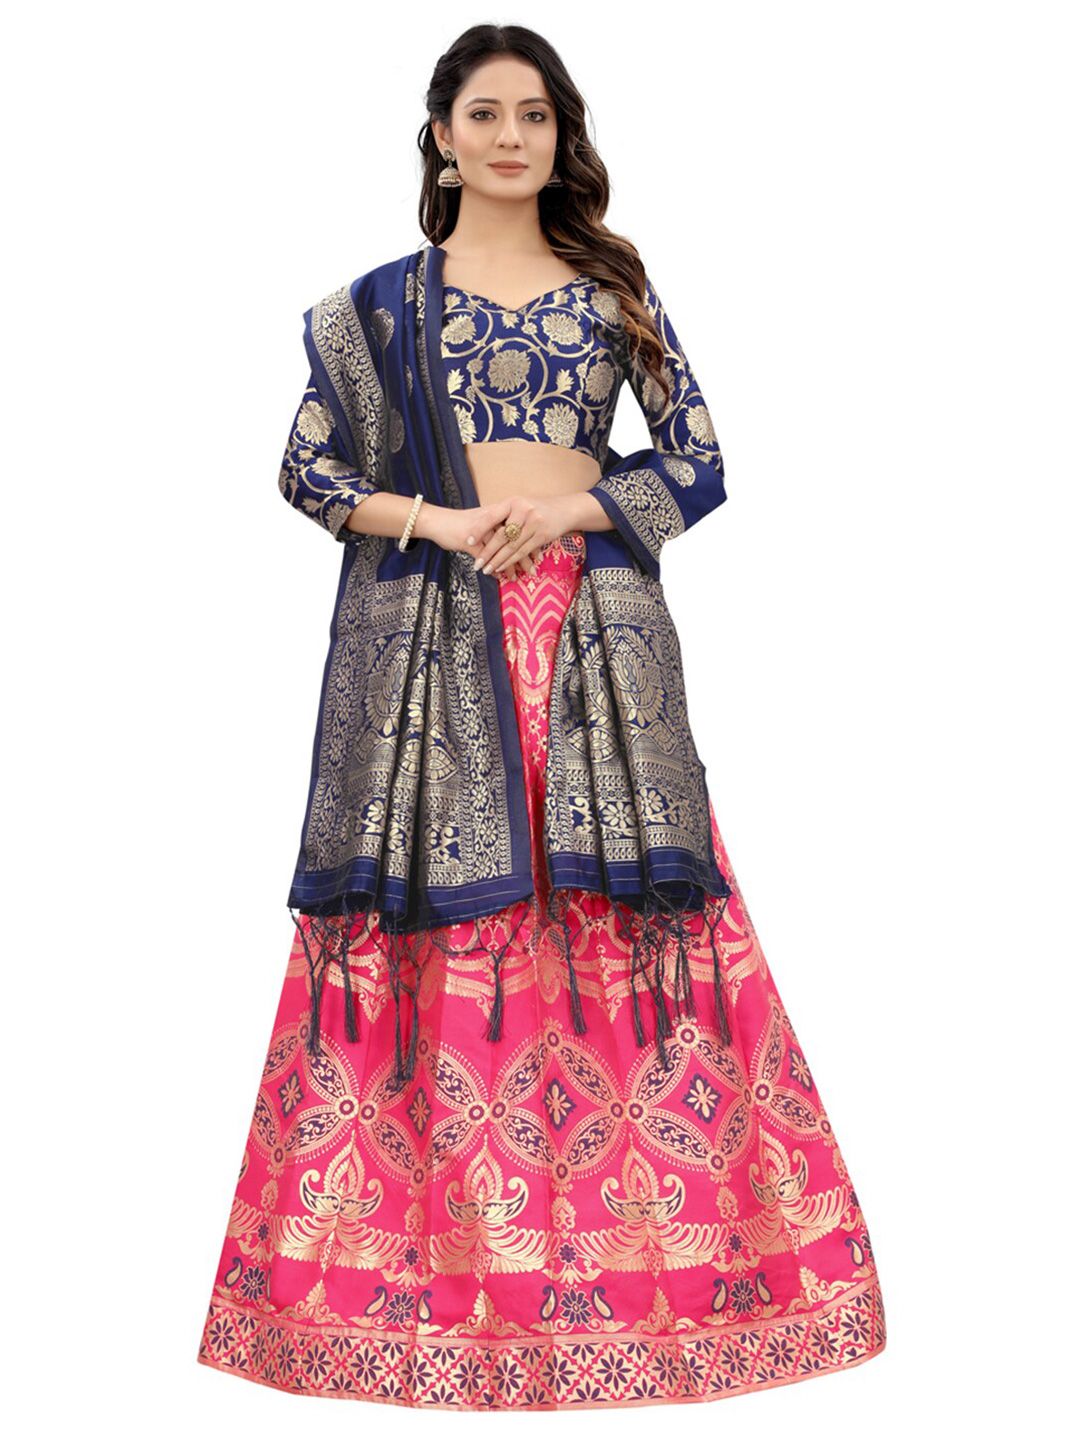 Xenilla Pink & Blue Embroidered Semi-Stitched Lehenga & Blouse With Dupatta Price in India